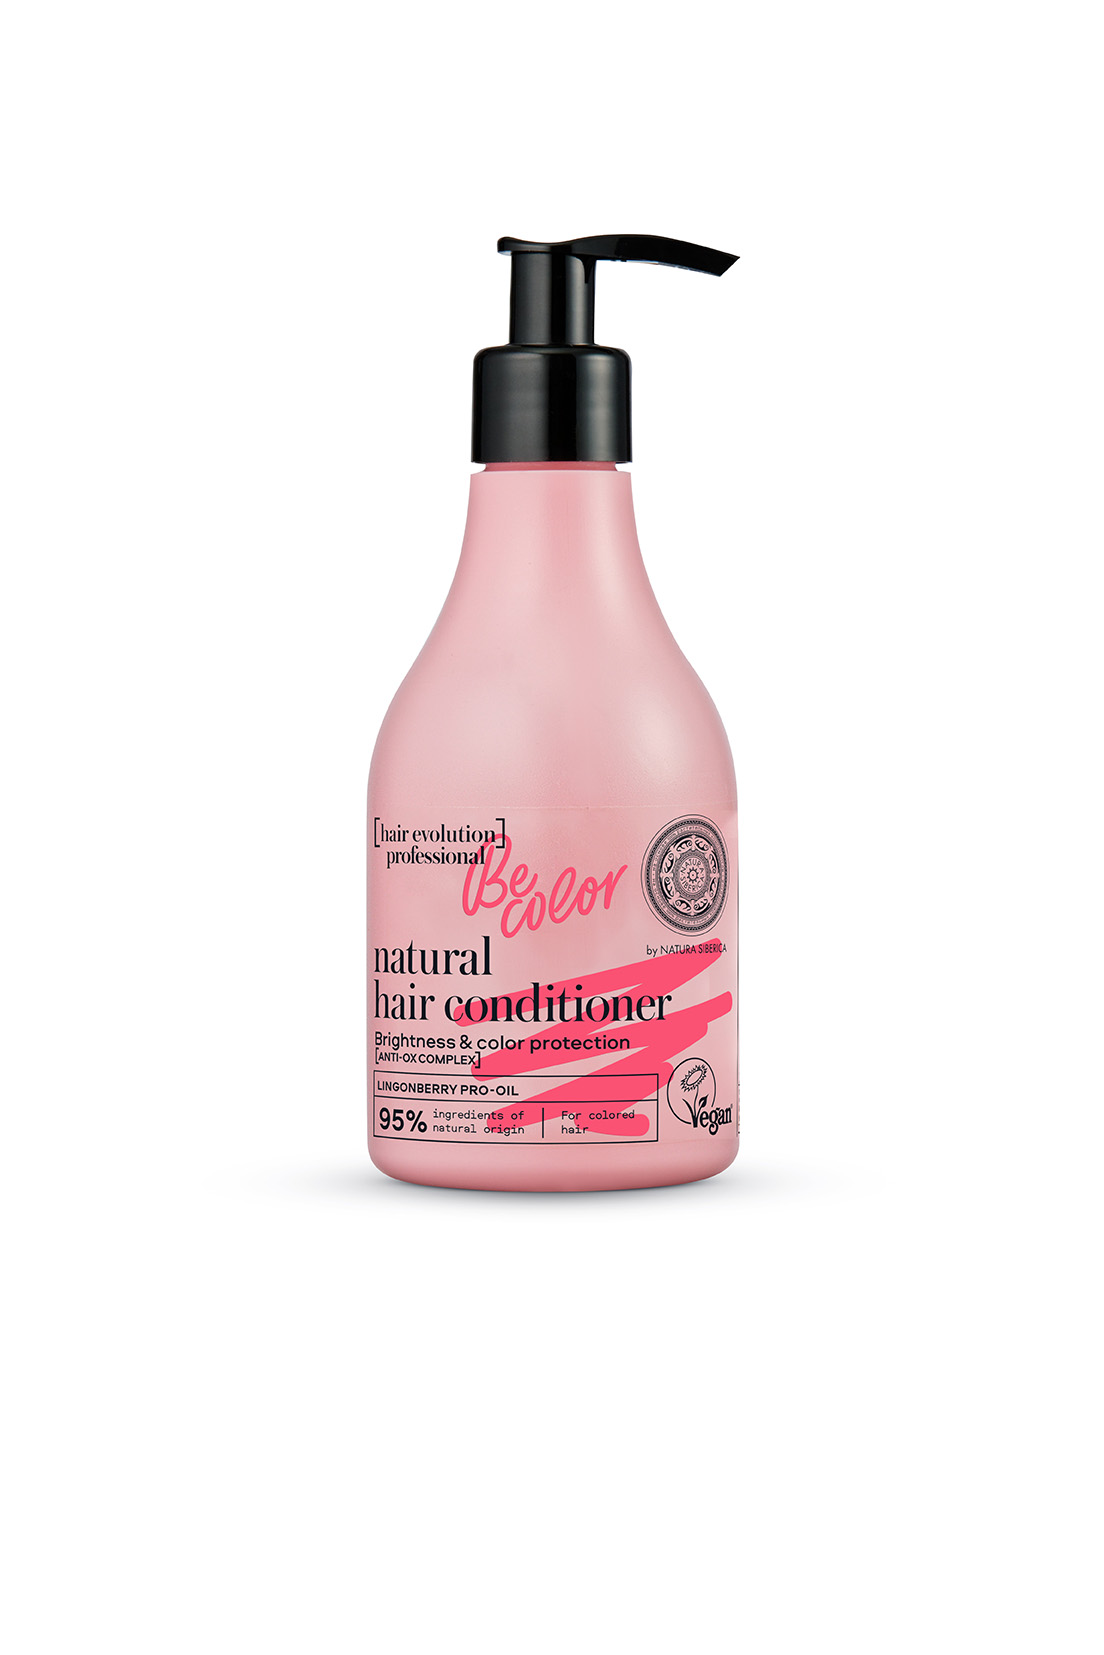 Brightness & color protection hair conditioner